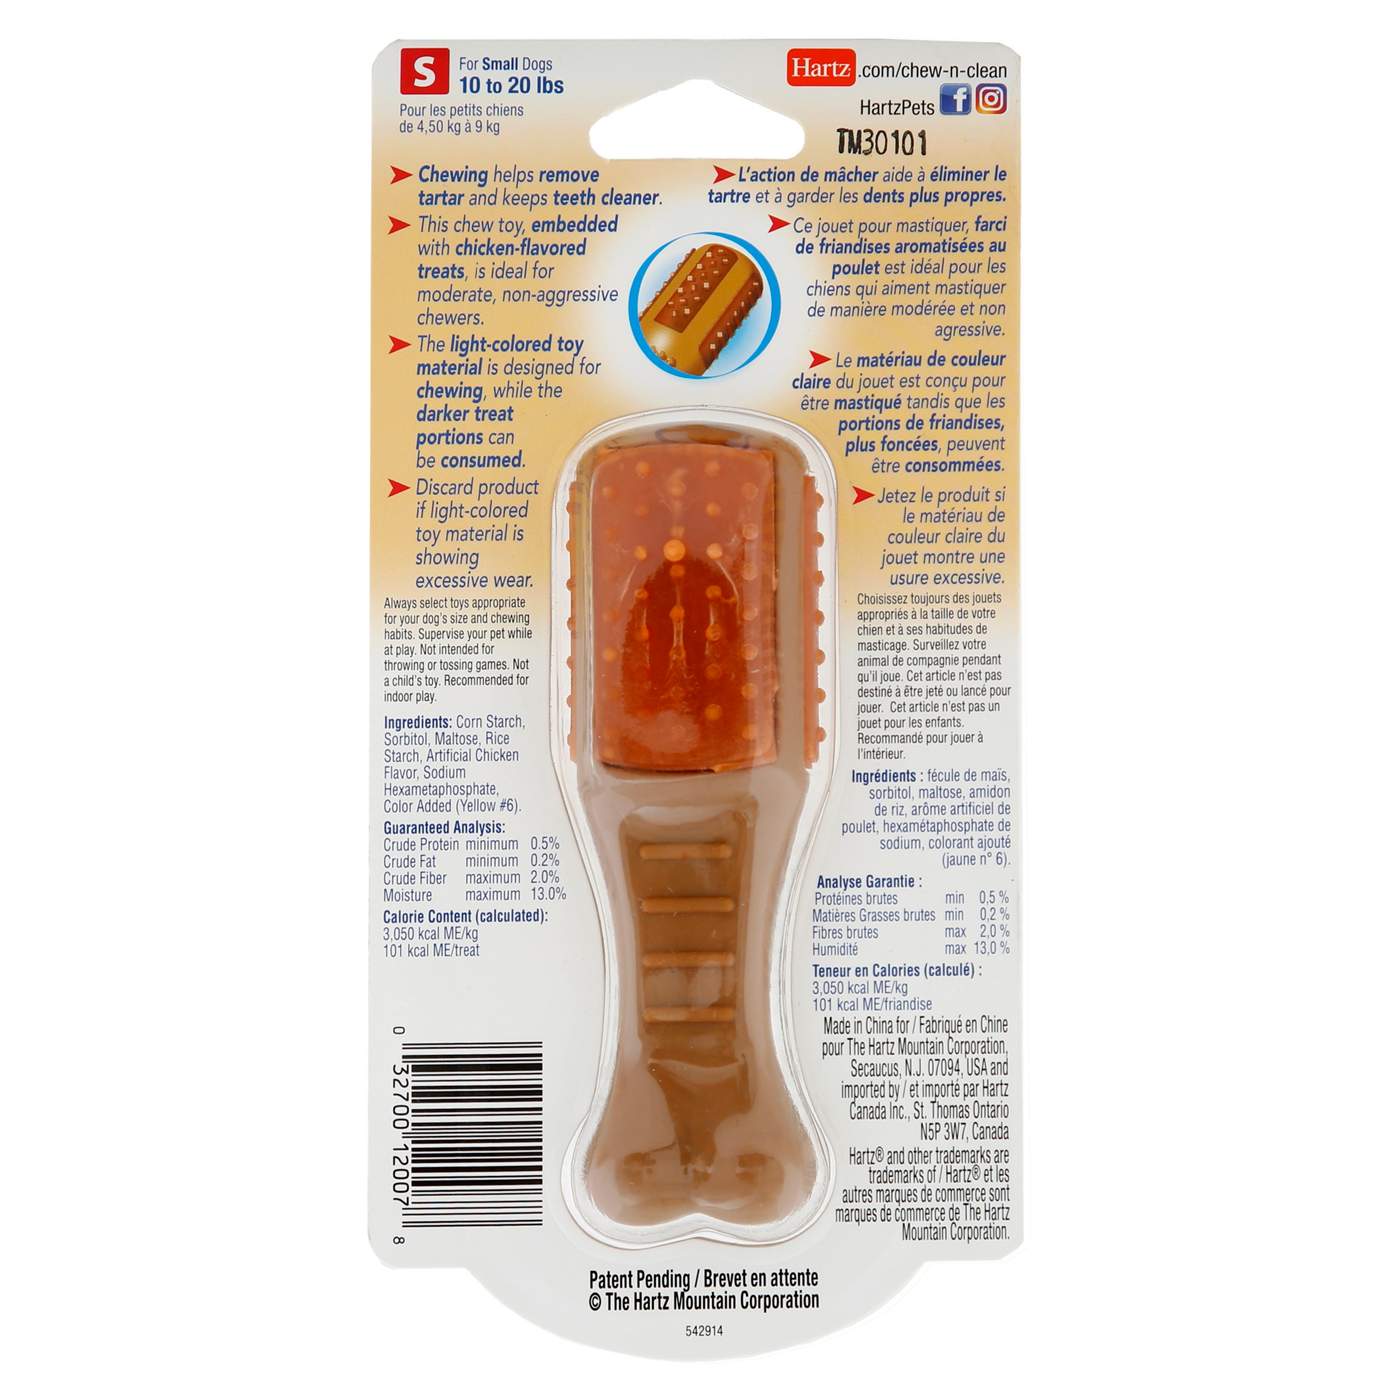 Hartz Chew n' Clean Chicken Flavor Drumstick Small Dog Toy; image 2 of 2